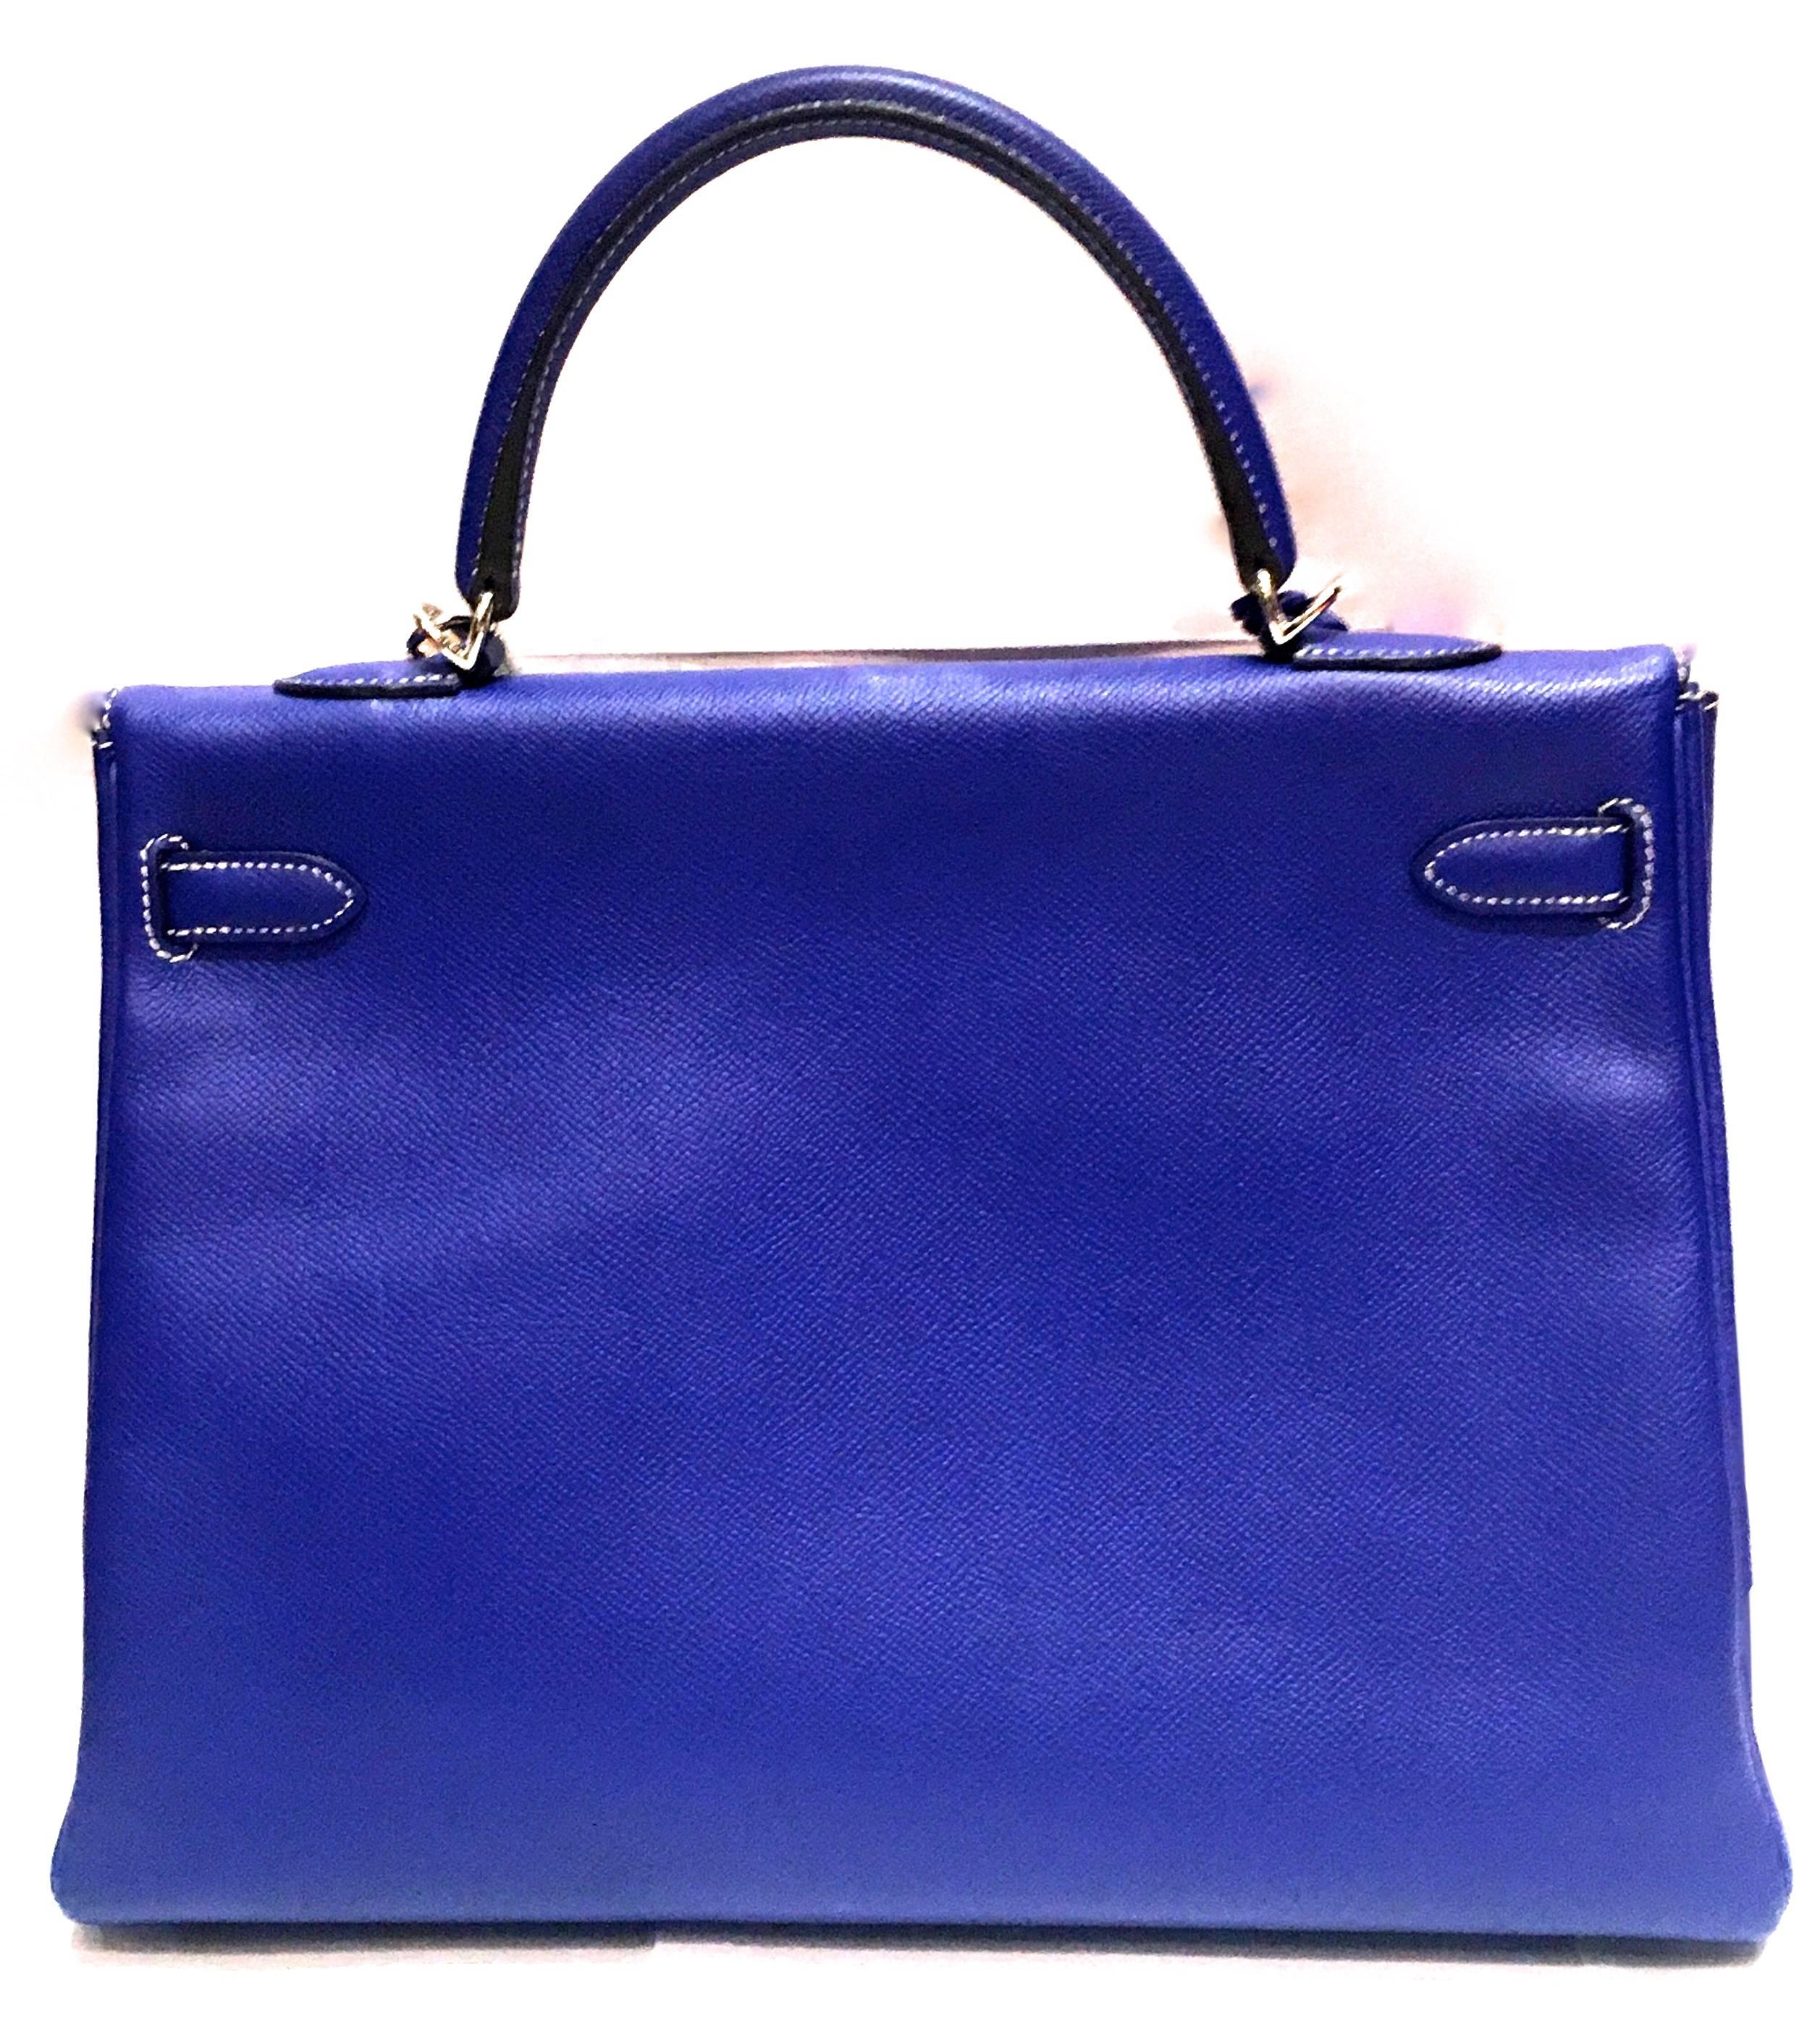 Presented here is a gorgeous handbag from Hermes Paris. This gorgeous handbag is the classic 'Kelly' styling which was made famous because Grace Kelly was known it the style being her favorite. This particular bag is made with epsom style leather on